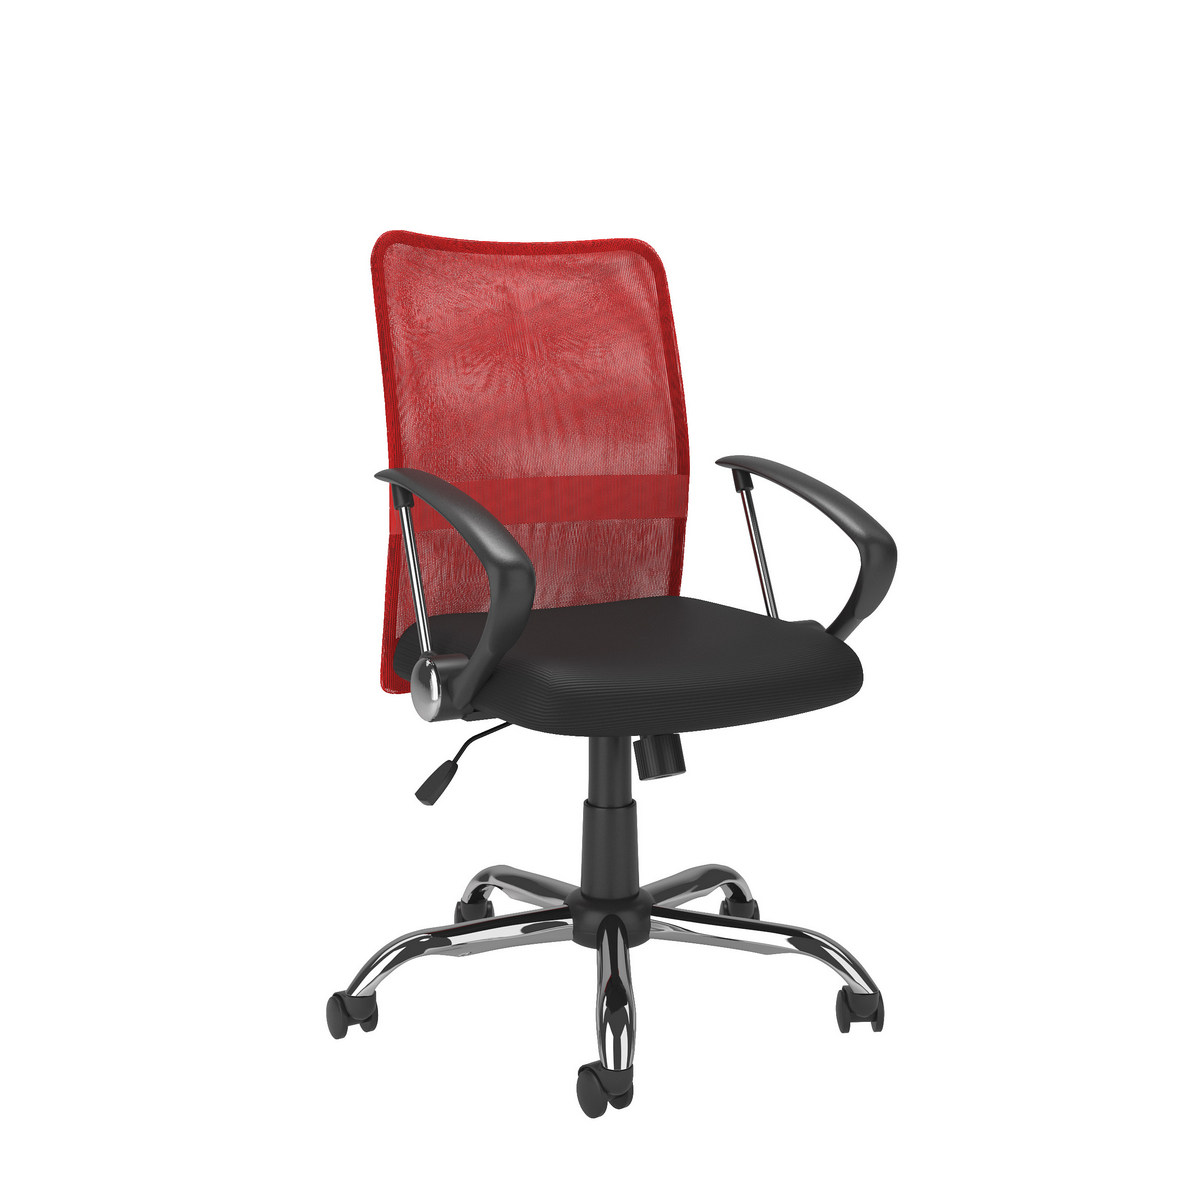 Corliving Whl-714-c Workspace Office Chair W/ Contoured Red Mesh Back